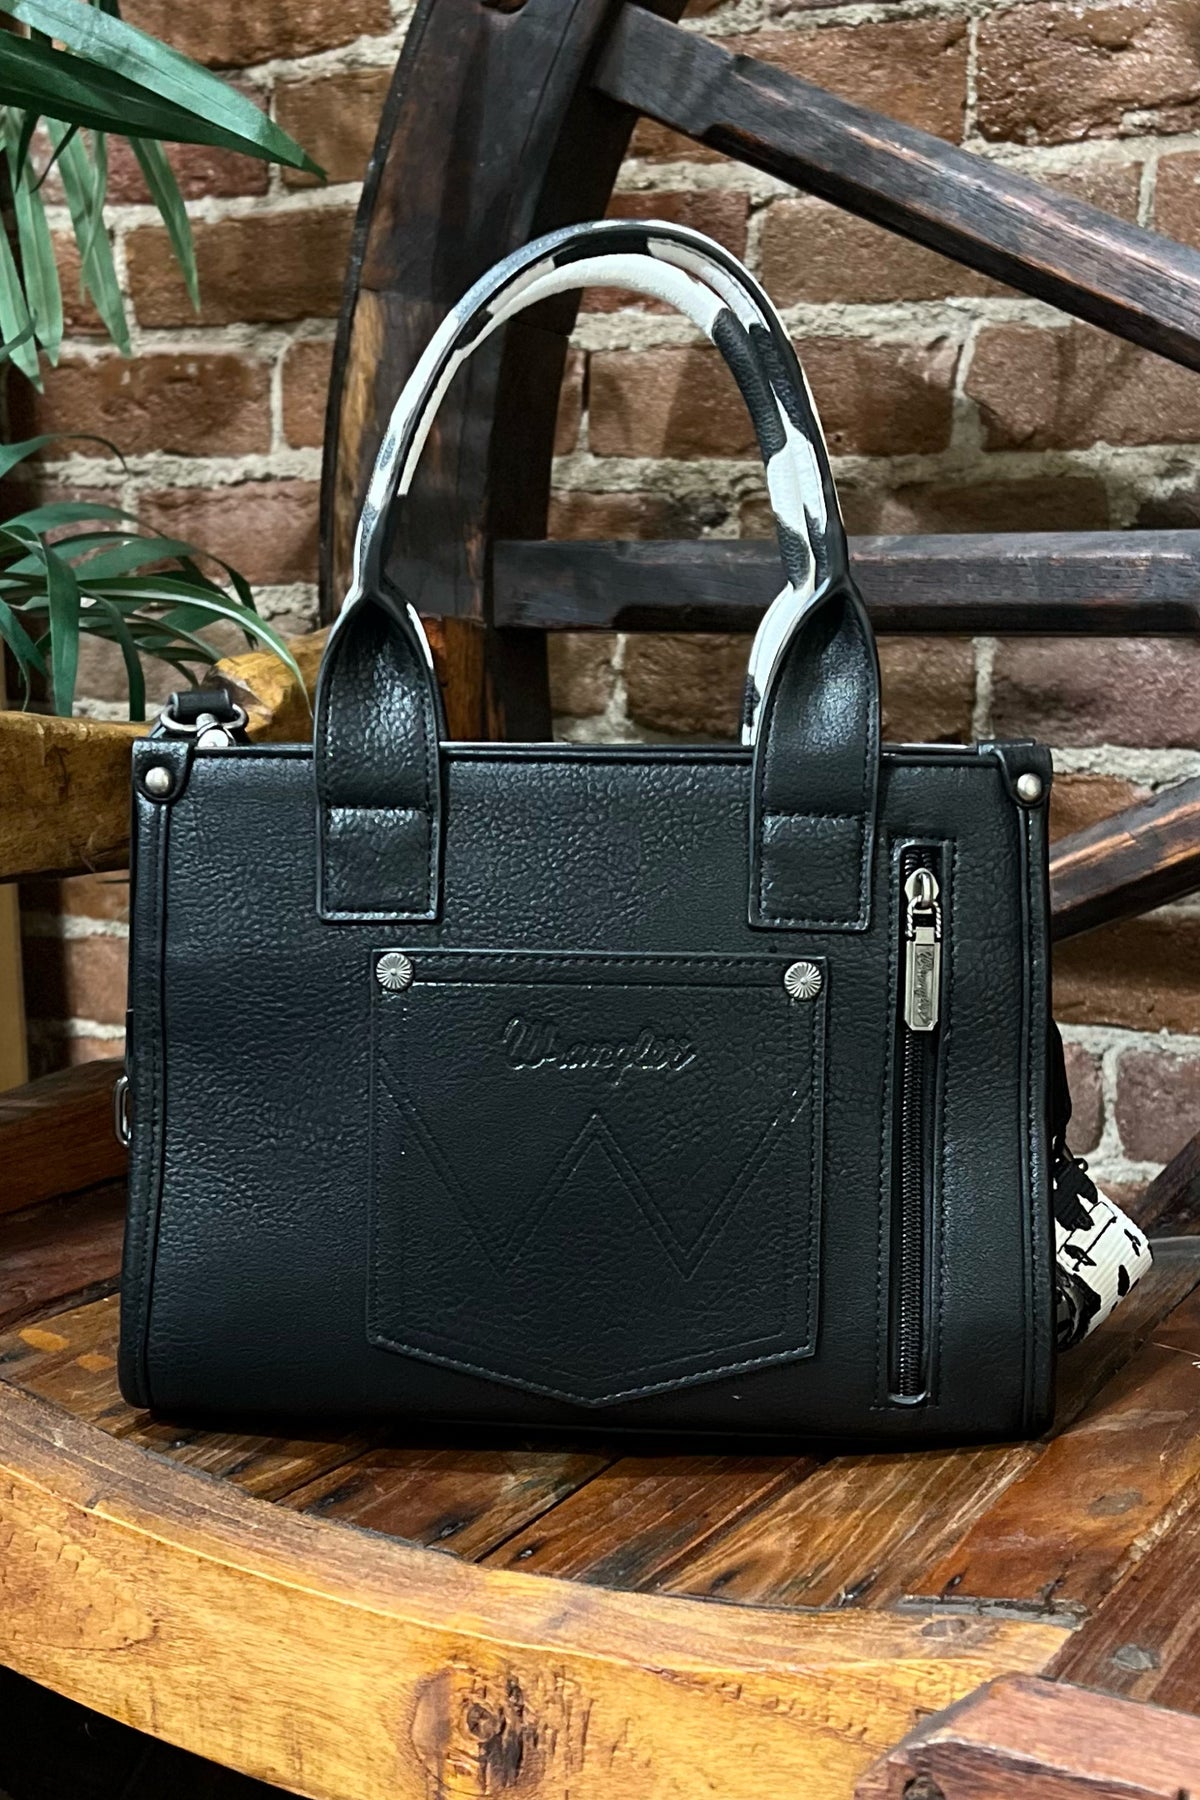 Wrangler Full Black Cow Print Concealed Carry Crossbody Tote-Handbags & Accessories-Montana West-Gallop 'n Glitz- Women's Western Wear Boutique, Located in Grants Pass, Oregon